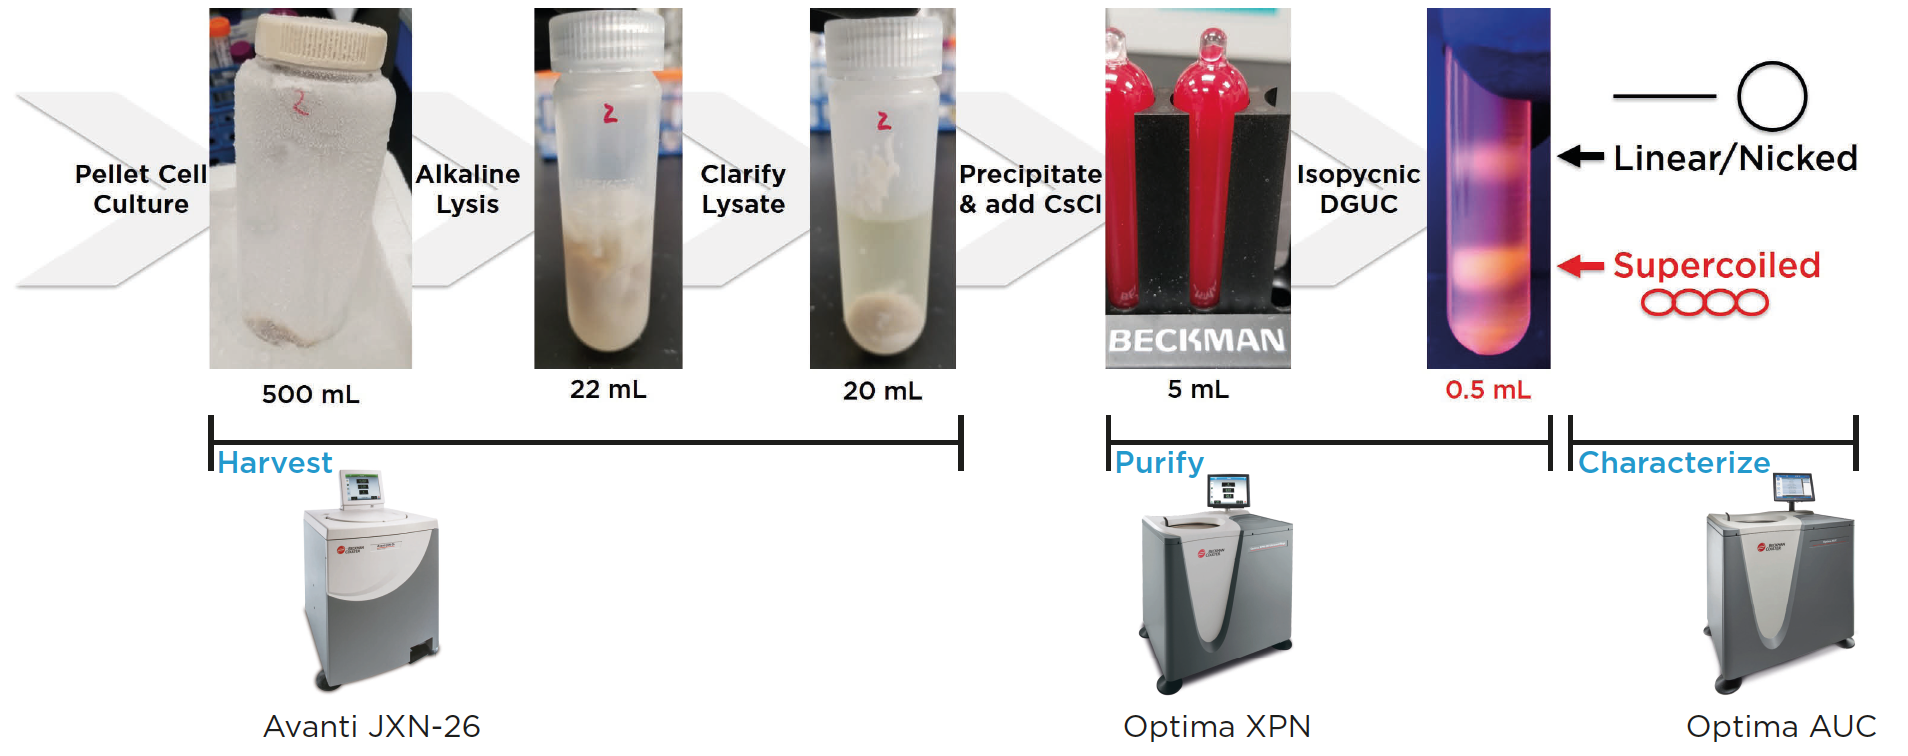 Applications of Ultracentrifugation in Purification and